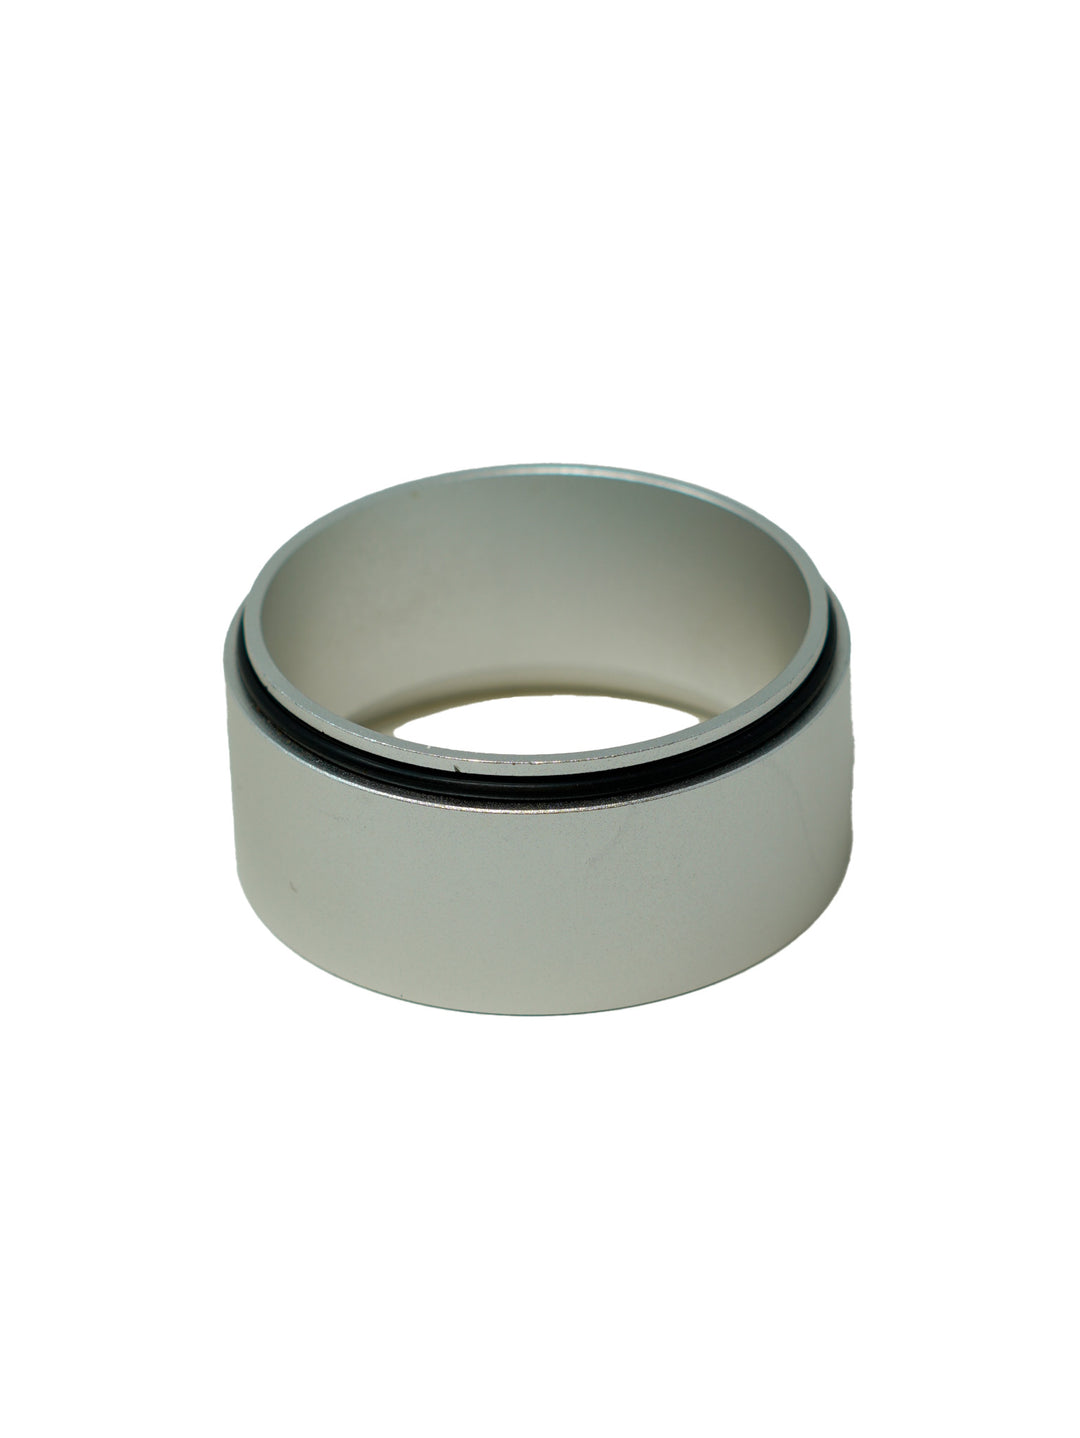 58mm Metal Dosing Collar for the Turin DF64 Grinder